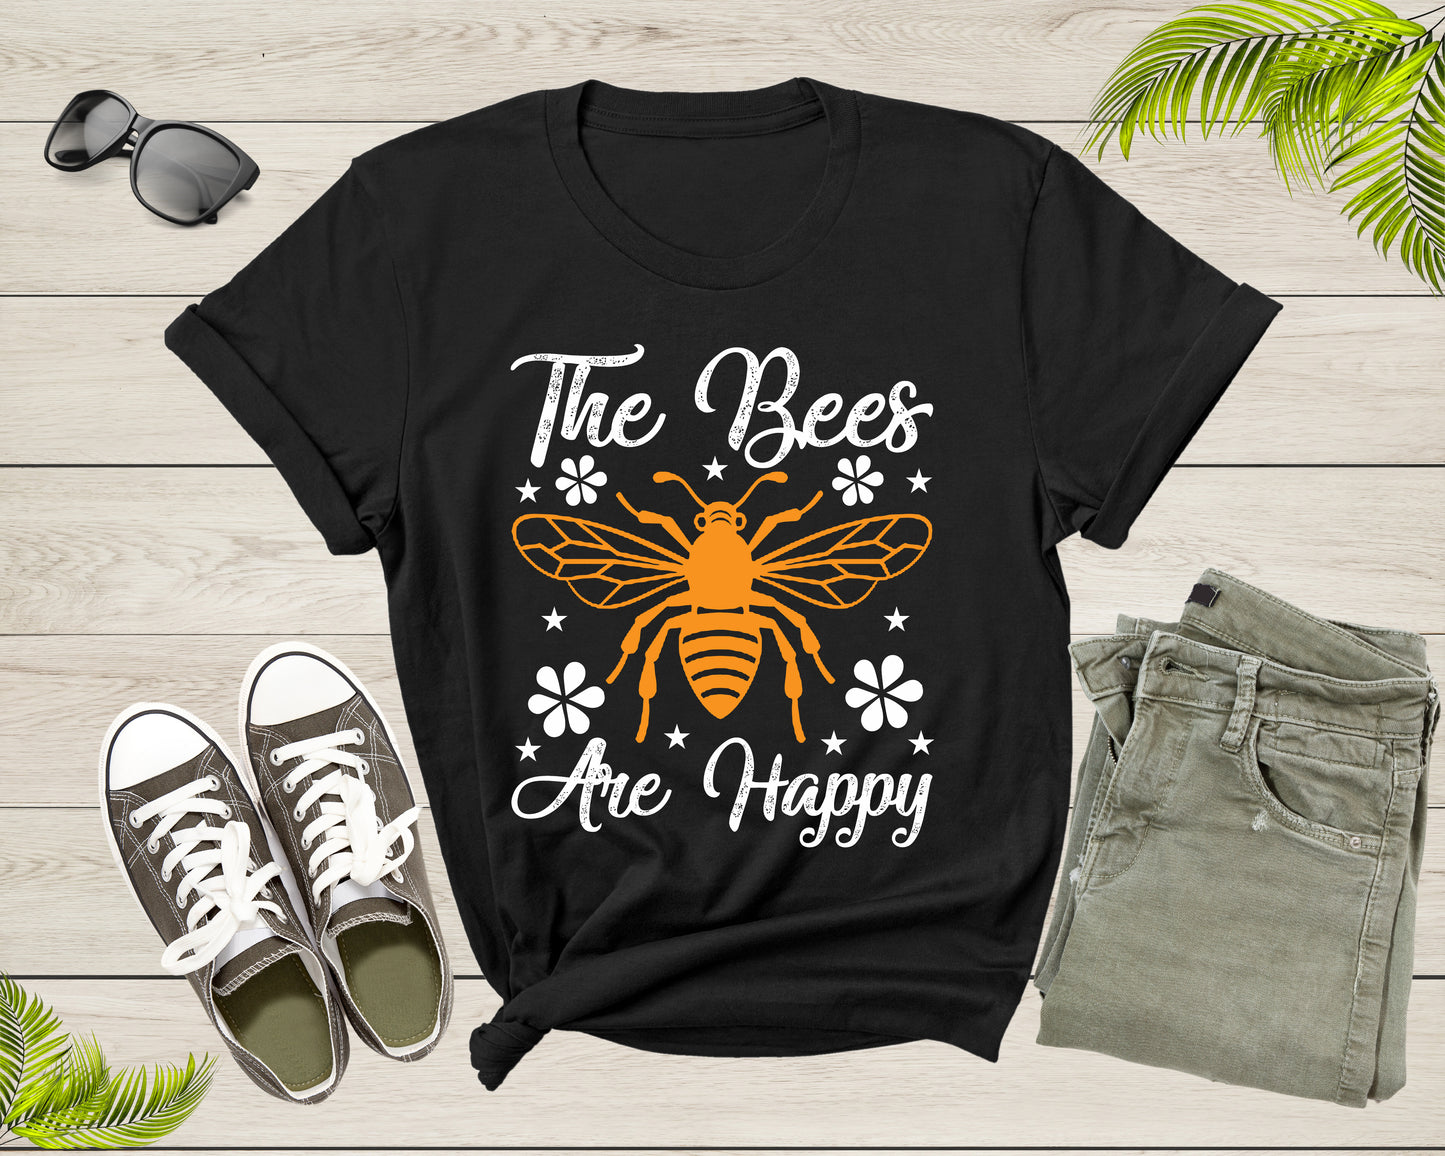 Bee Lover Gift for Beekeepers Bumblebee Birthday Men Women T-Shirt Save the Bees Shirt Honey Bee Shirt Beekeeper Shirt Bee Lover Shirt